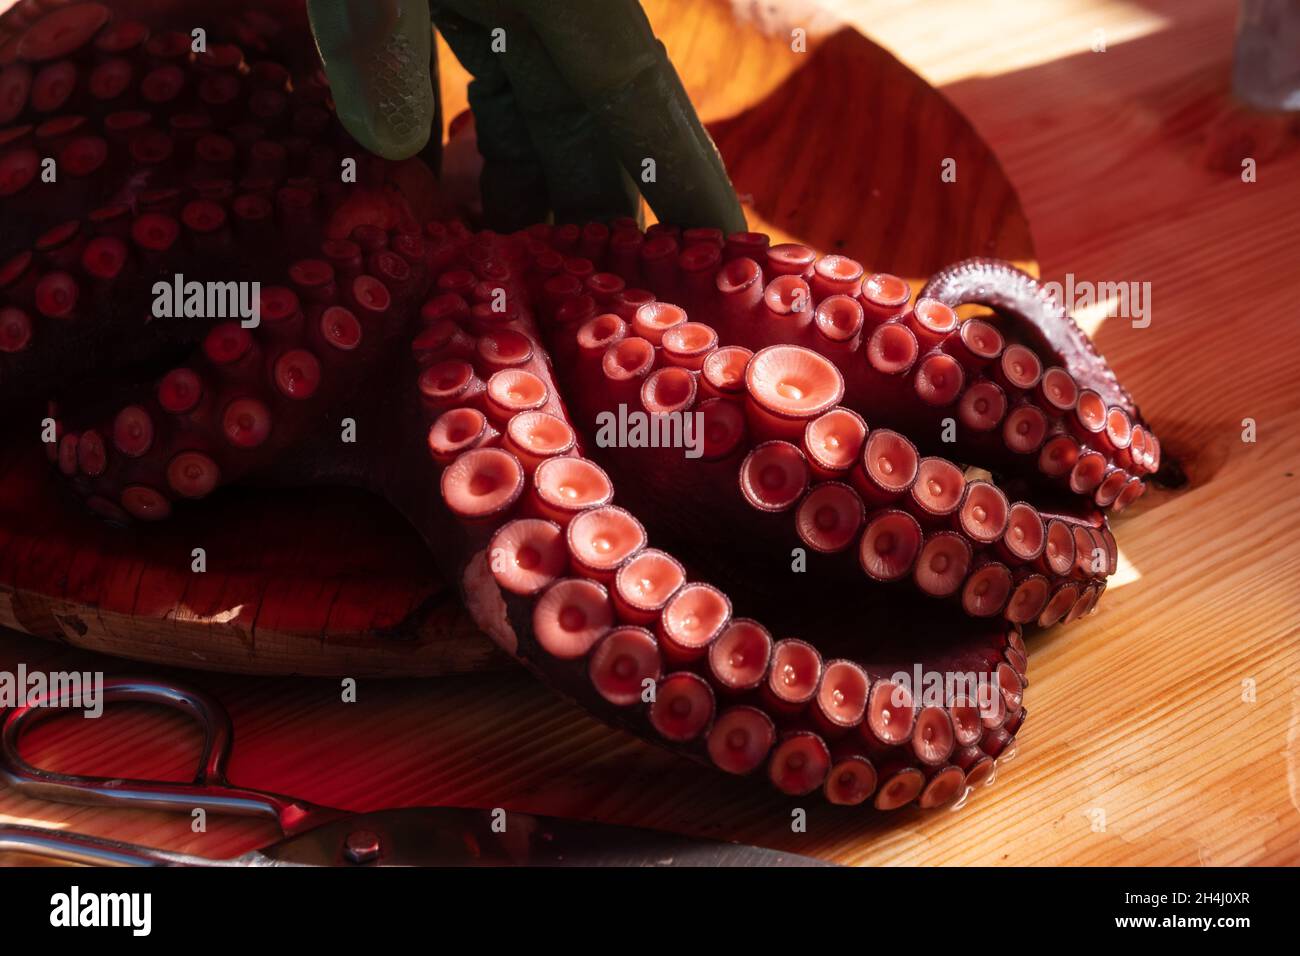 octopus tentacles prepared in the style of pulpo a feira, typical of Galicia, Spain. Stock Photo